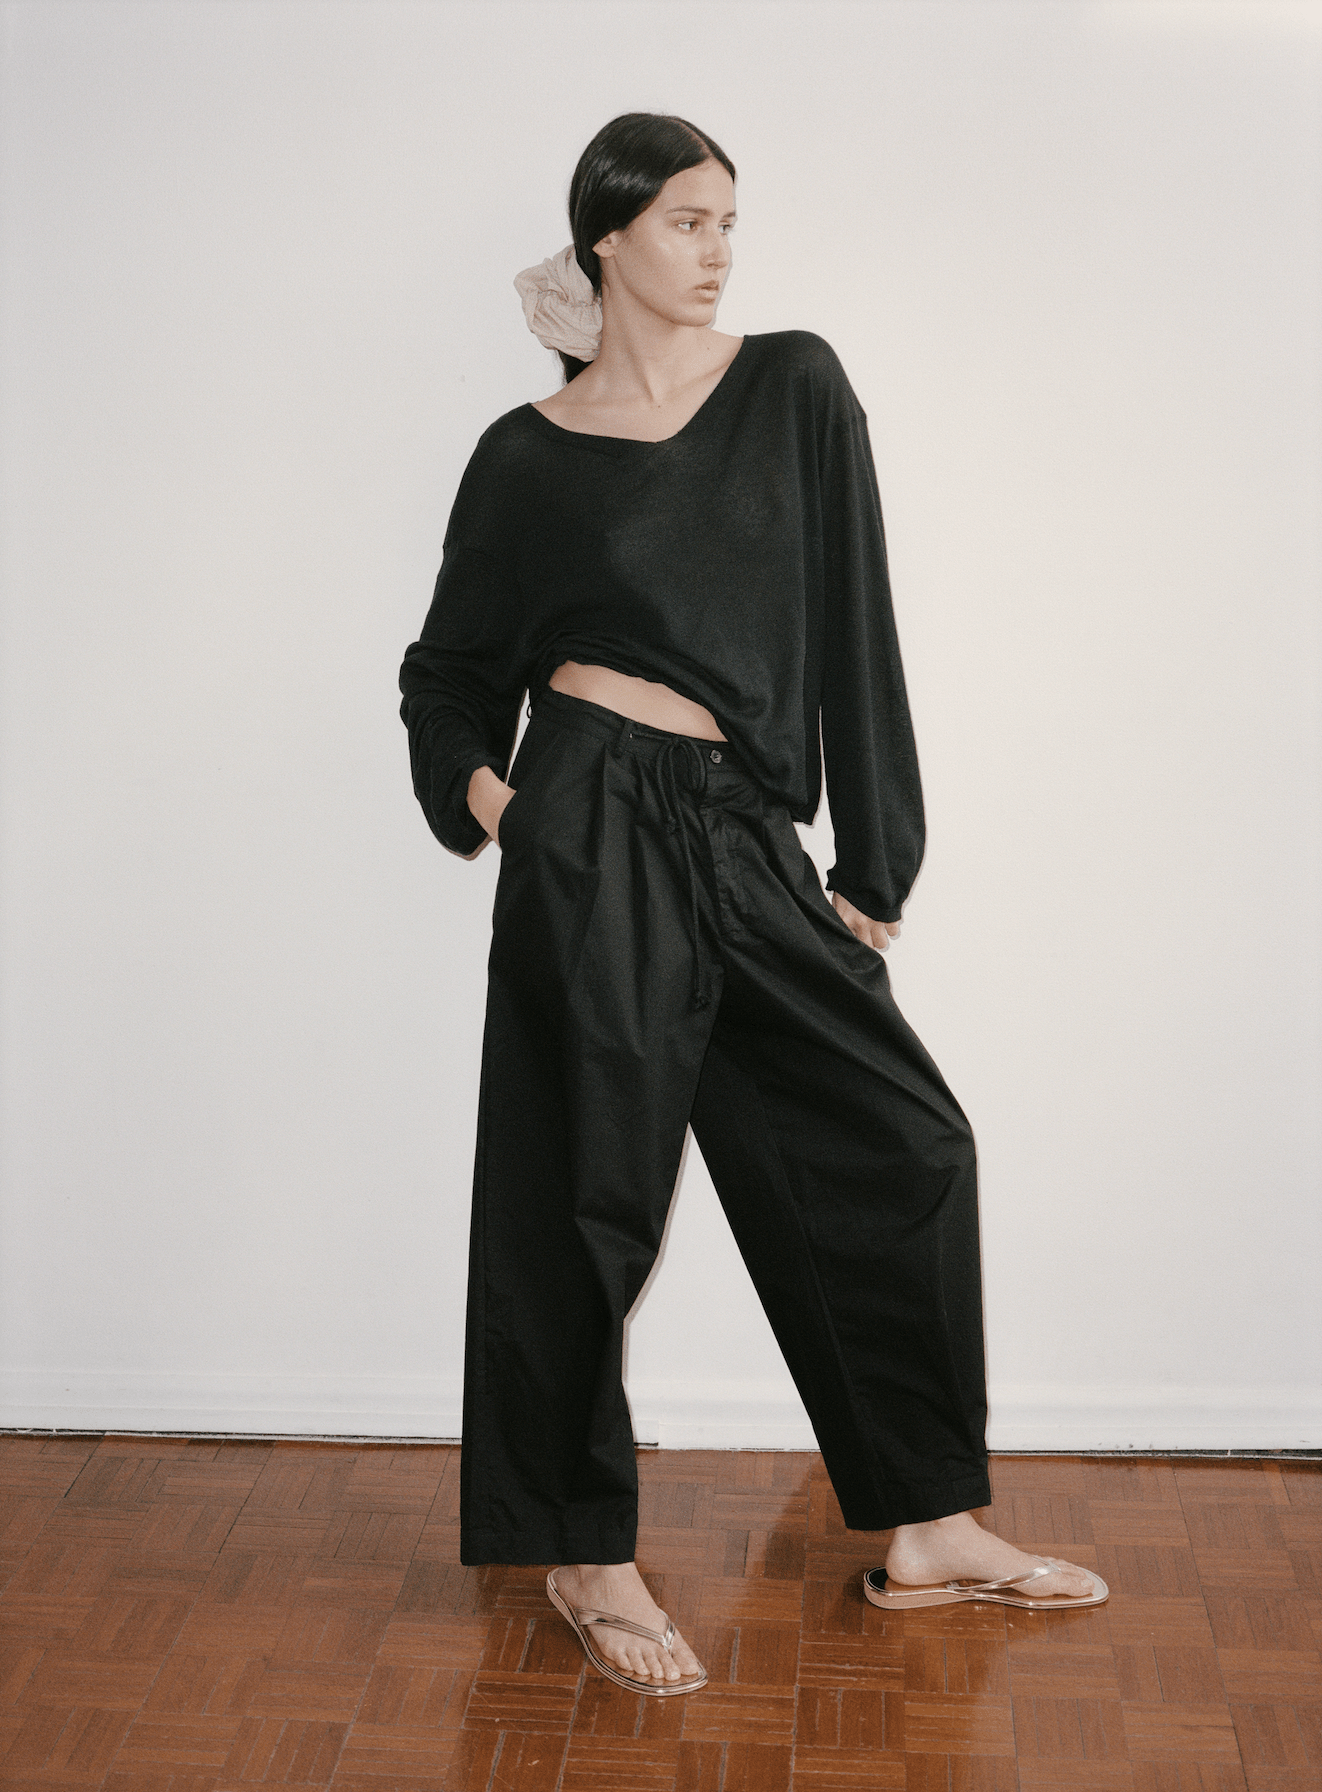 Female model wears the Deiji Studios Loose Long Sleeve Knitted Top in black, styled with the Cotton Pant in black and Scrunchie in Sand Stripe worn in hair. Pant has a drawcord waist, belt loops and a relaxed tapered leg.